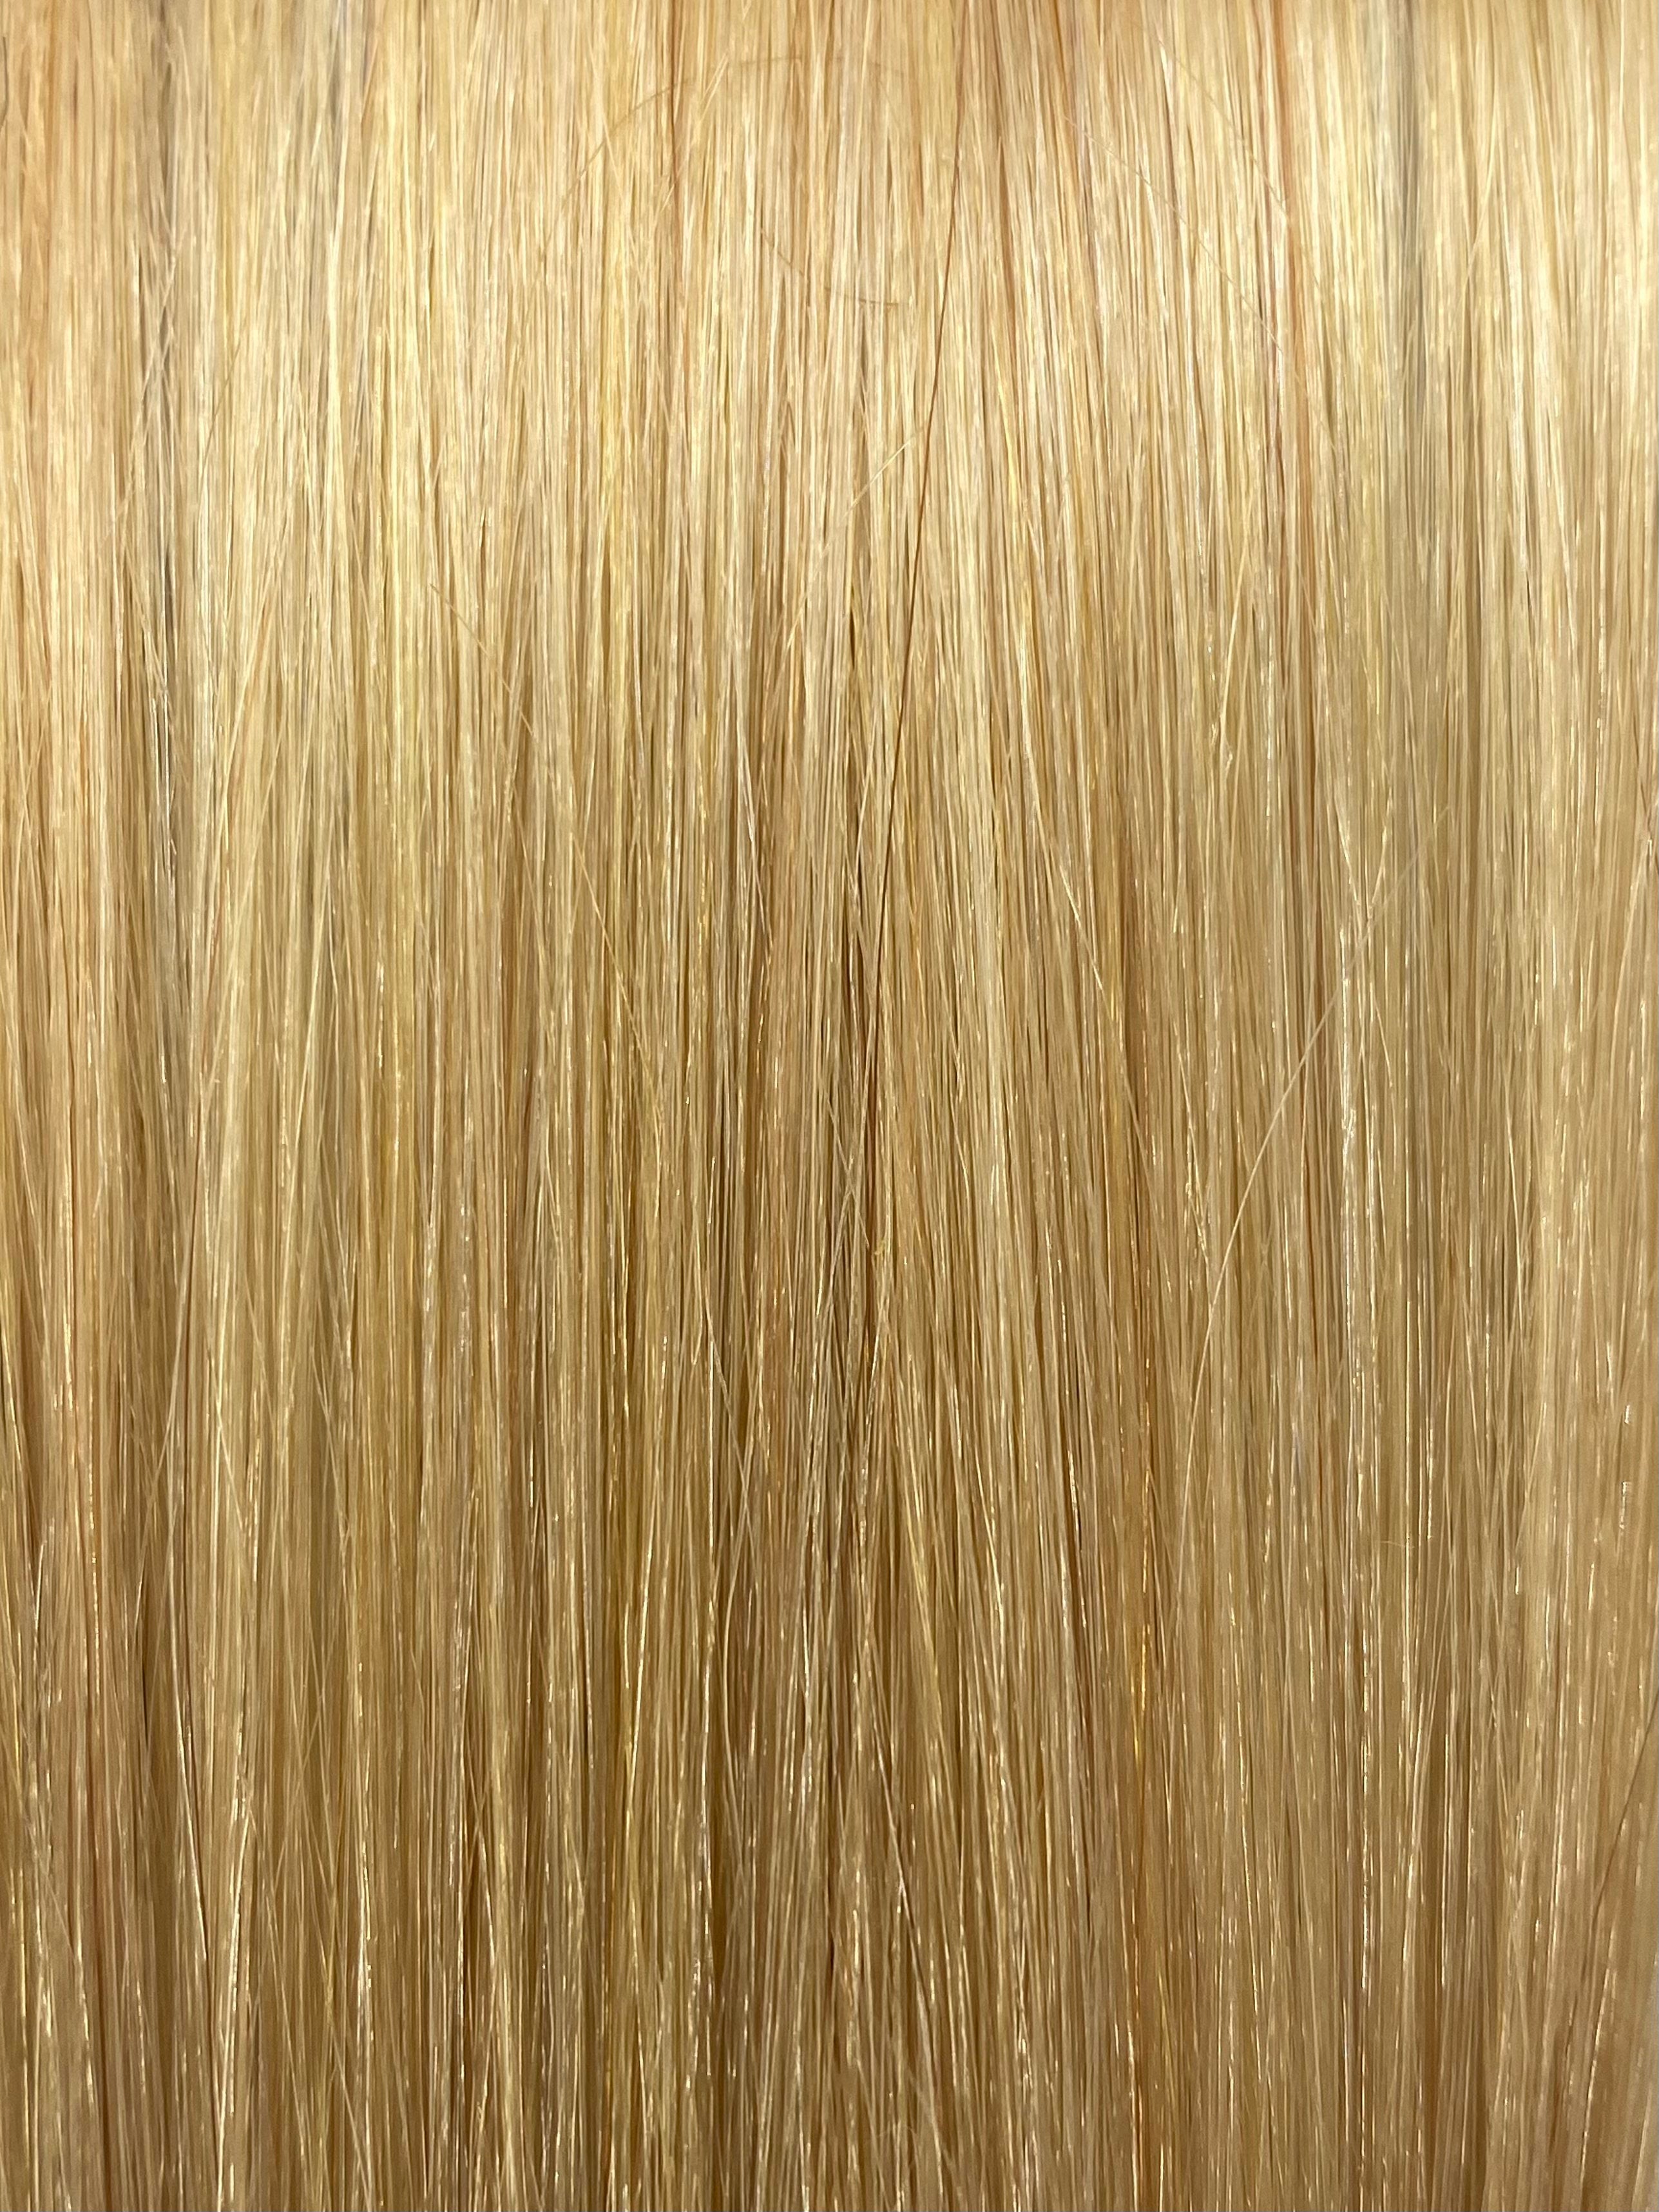 FUSION #DB2 LIGHT GOLDEN BLONDE 50CM/ 20 INCHES  -  20 GRAMS - Image 1